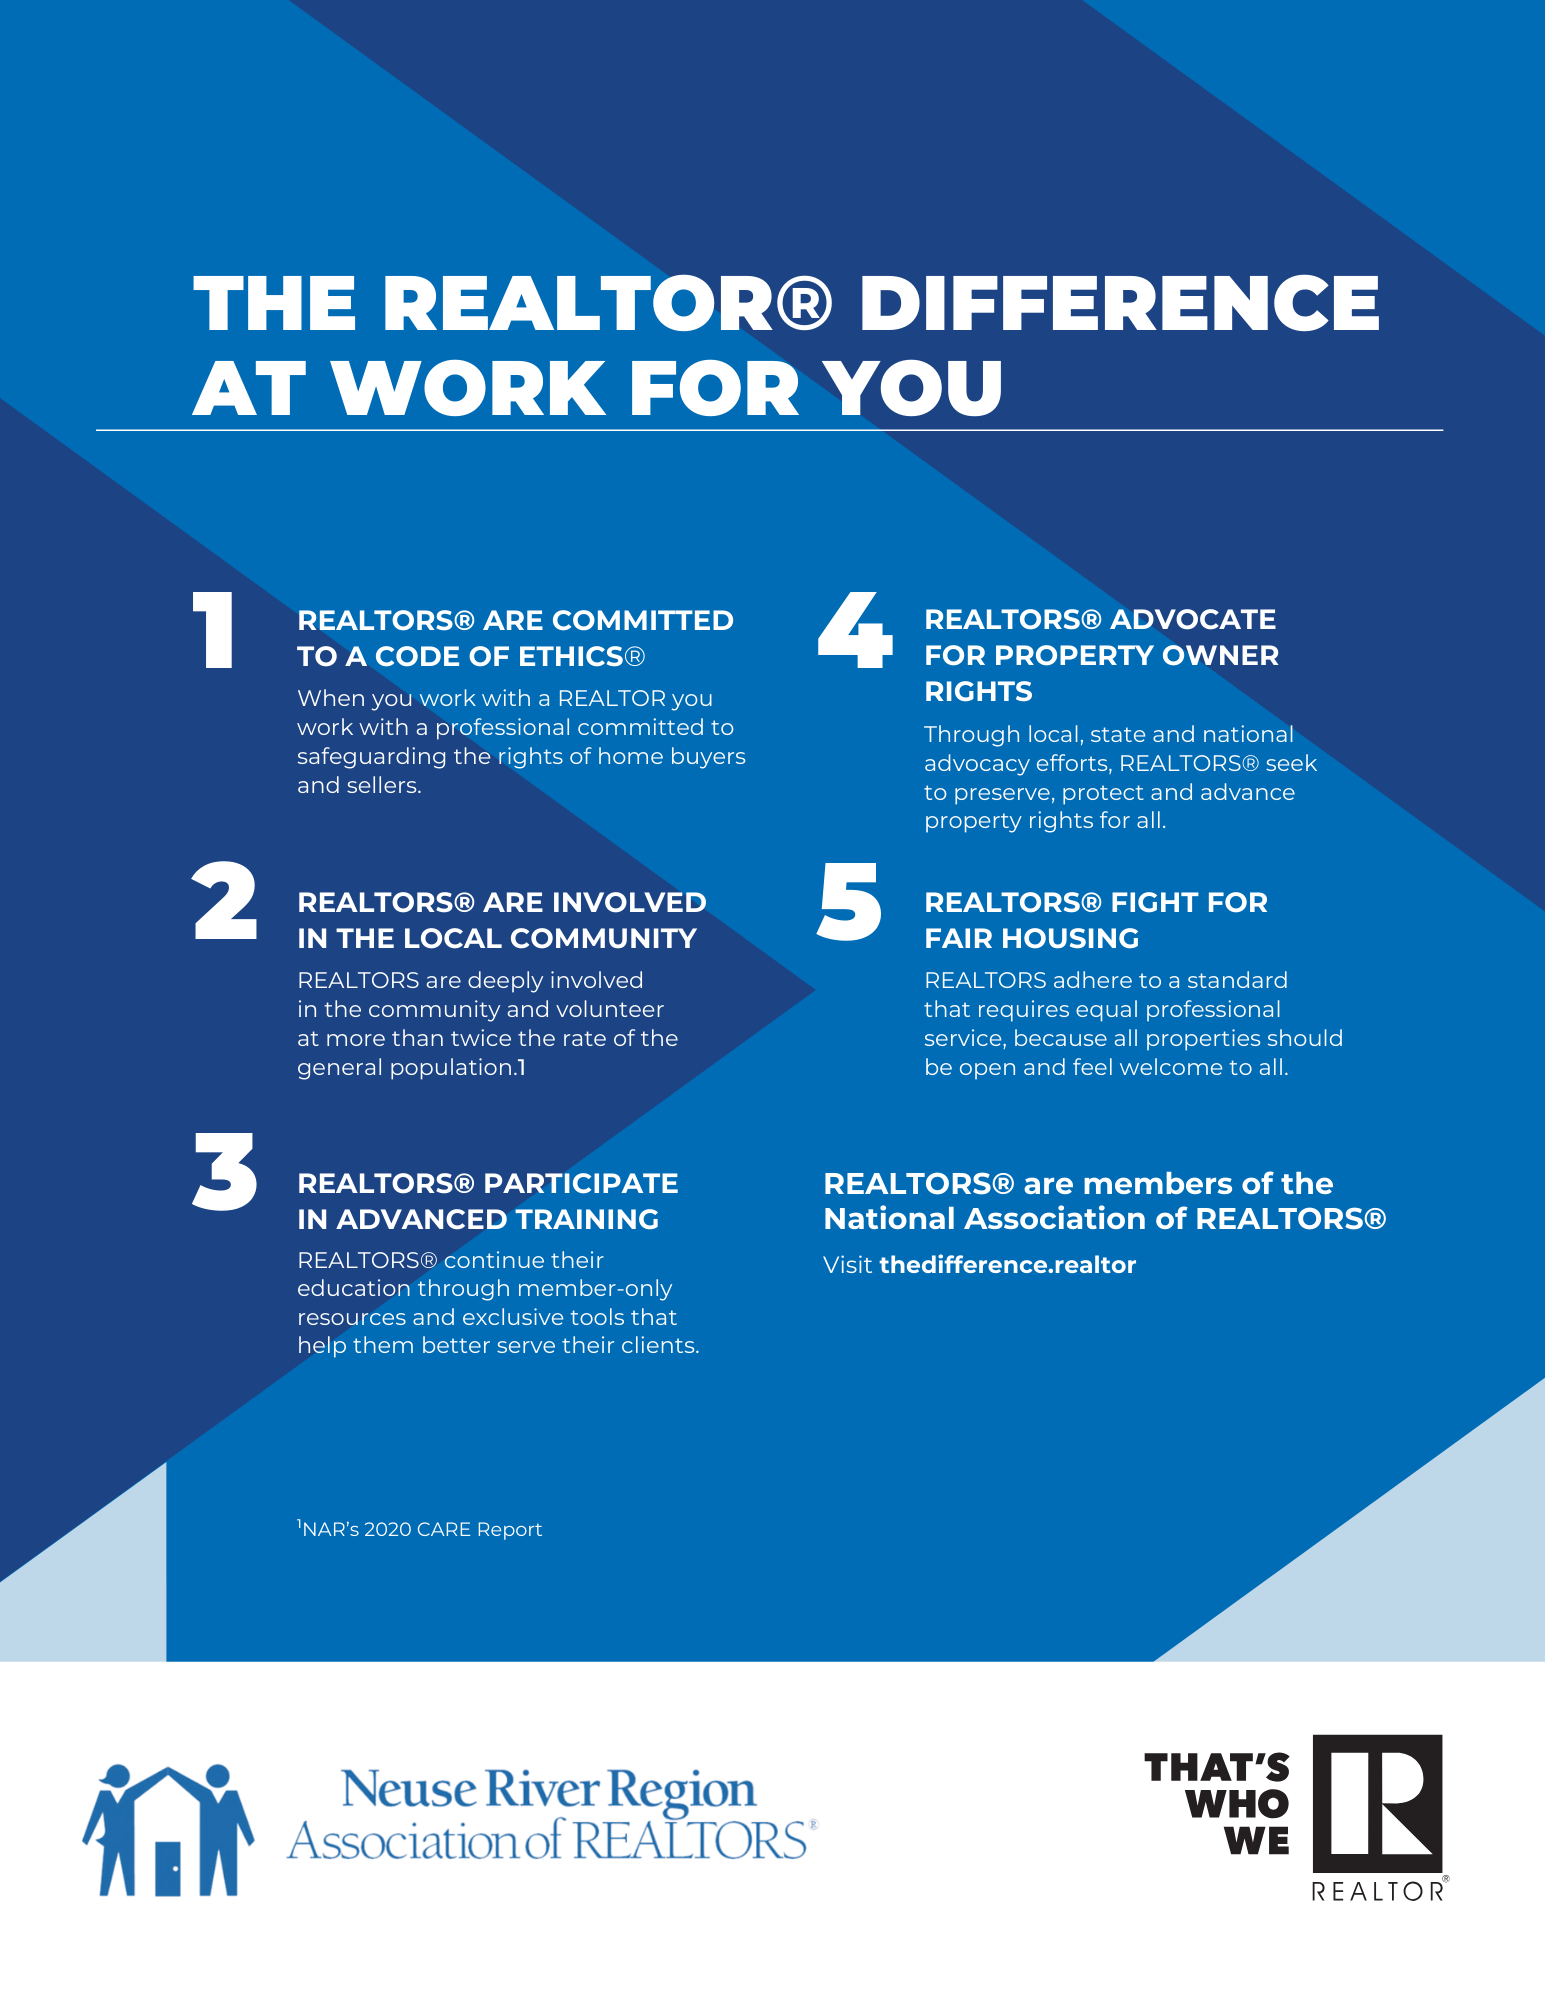 Visit the difference.realtor